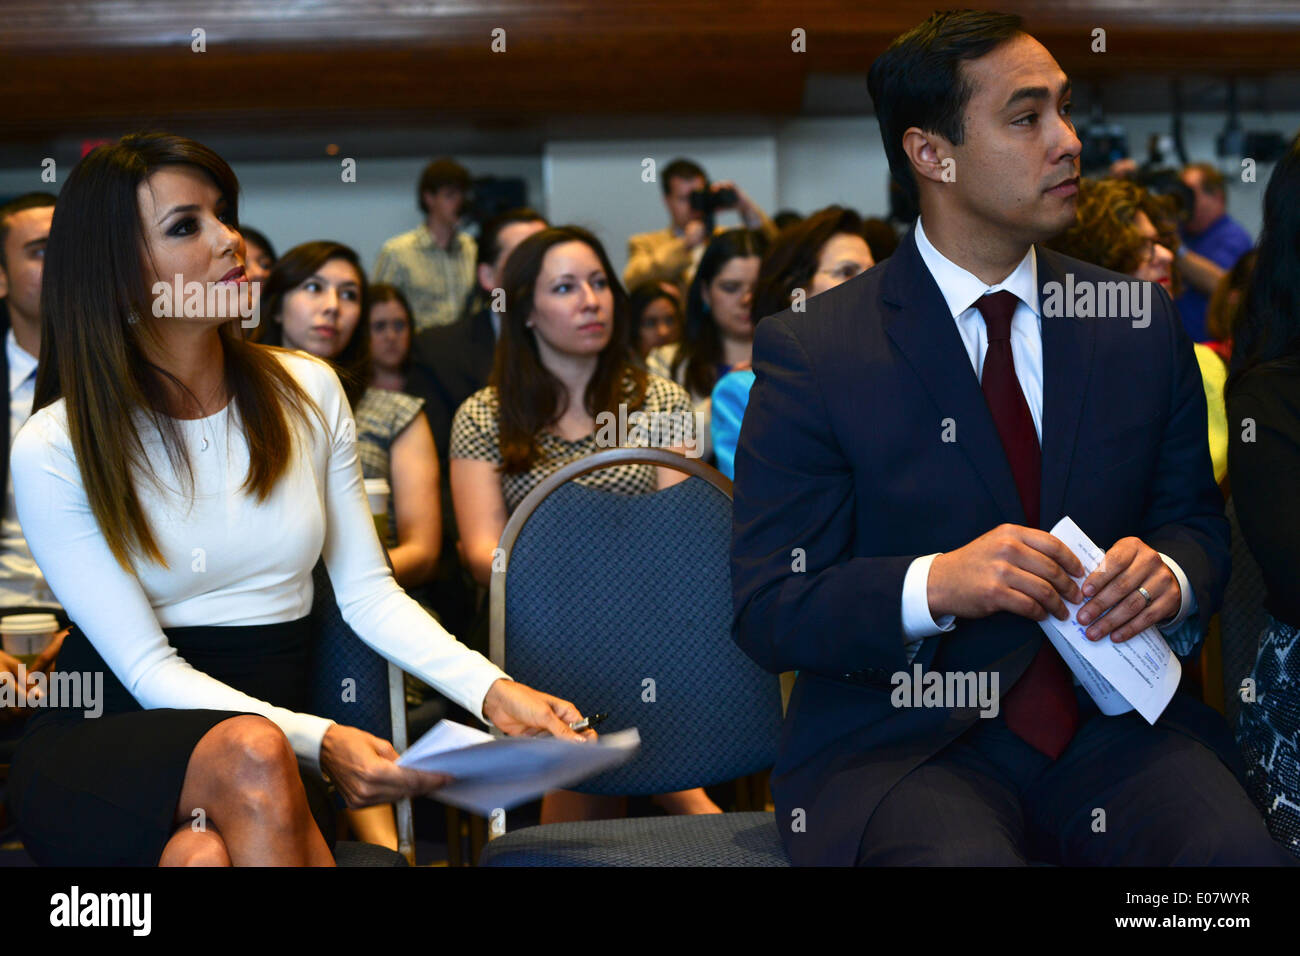 Washington, District of Columbia, USA. 5th May, 2014. Actress and political activist EVA LONGORIA, helps launch The Latino Victory Project in Washington Monday, which she describes as a non-partisan organization that aims to build political within the Latino community, to ensure that the voices of Latinos are reflected at all levels of government and policy decisions. On right, Texas Congressman, JOAQUIN CASTRO. (Credit Image: Credit:  Miguel Juarez Lugo/ZUMAPRESS.com/Alamy Live News) Stock Photo